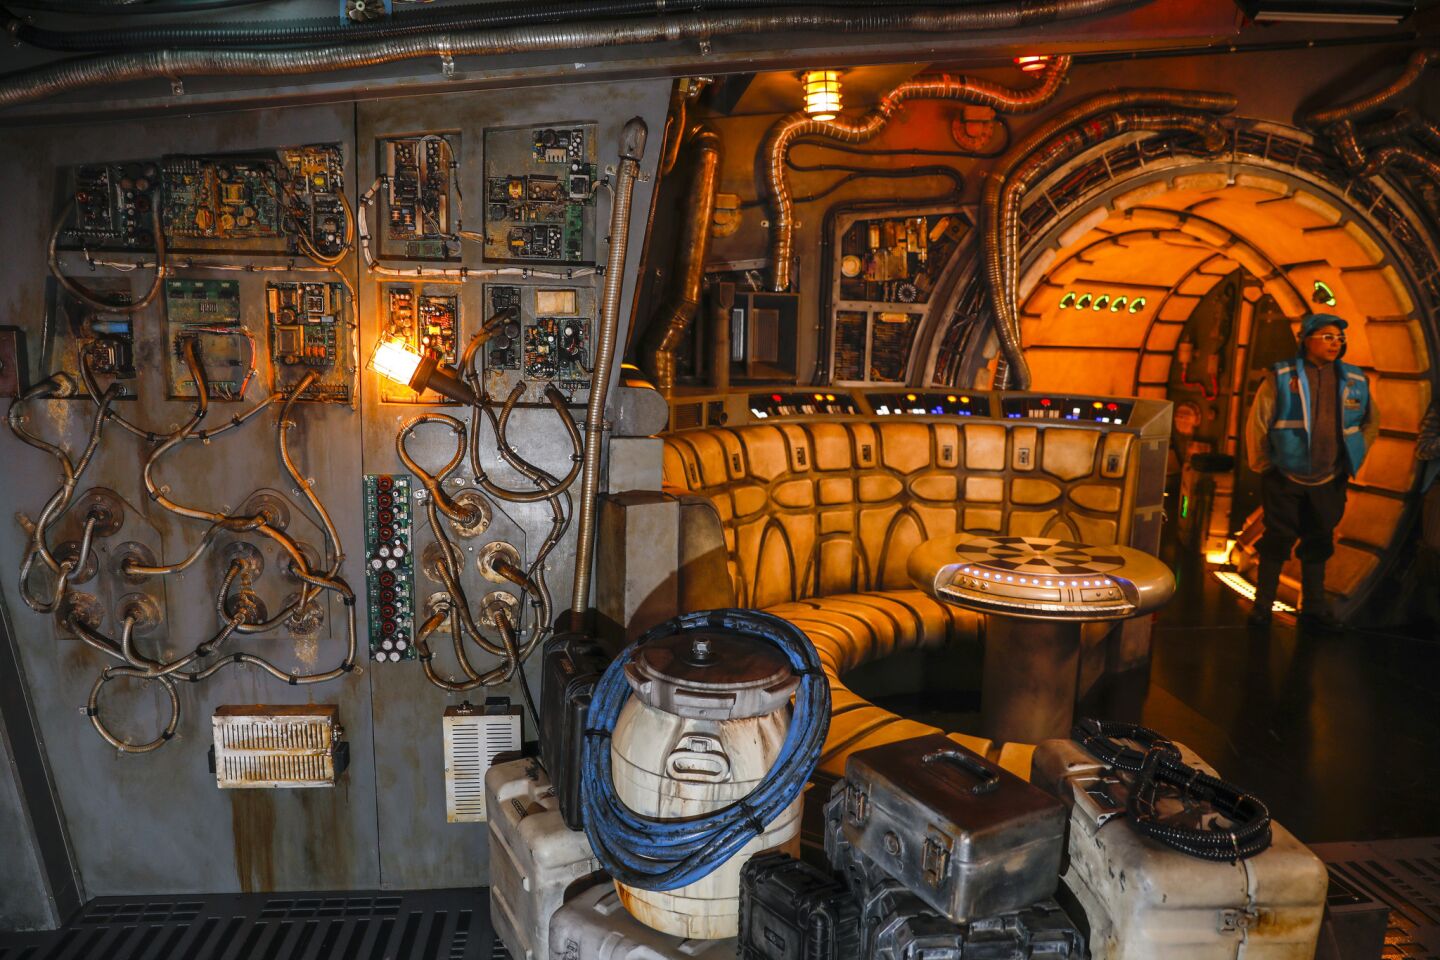 The alien insides of the Millennium Falcon: Smugglers Run ride in Star Wars: Galaxy's Edge at Disneyland.